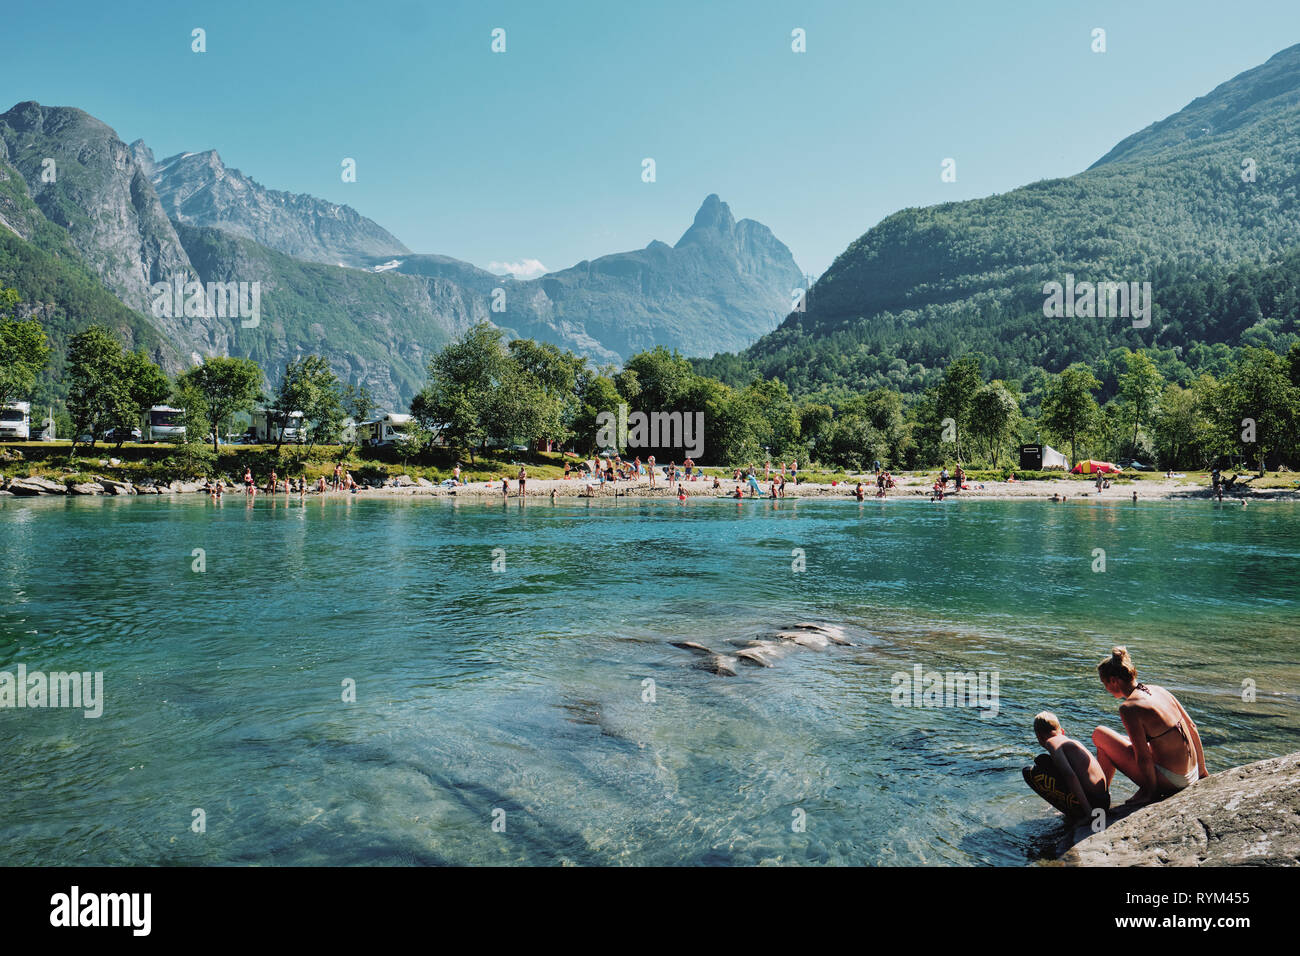 Bathers on the Rauma River in the summer landscape of the Romsdalen Valley near Åndalsnes, Norway Stock Photo